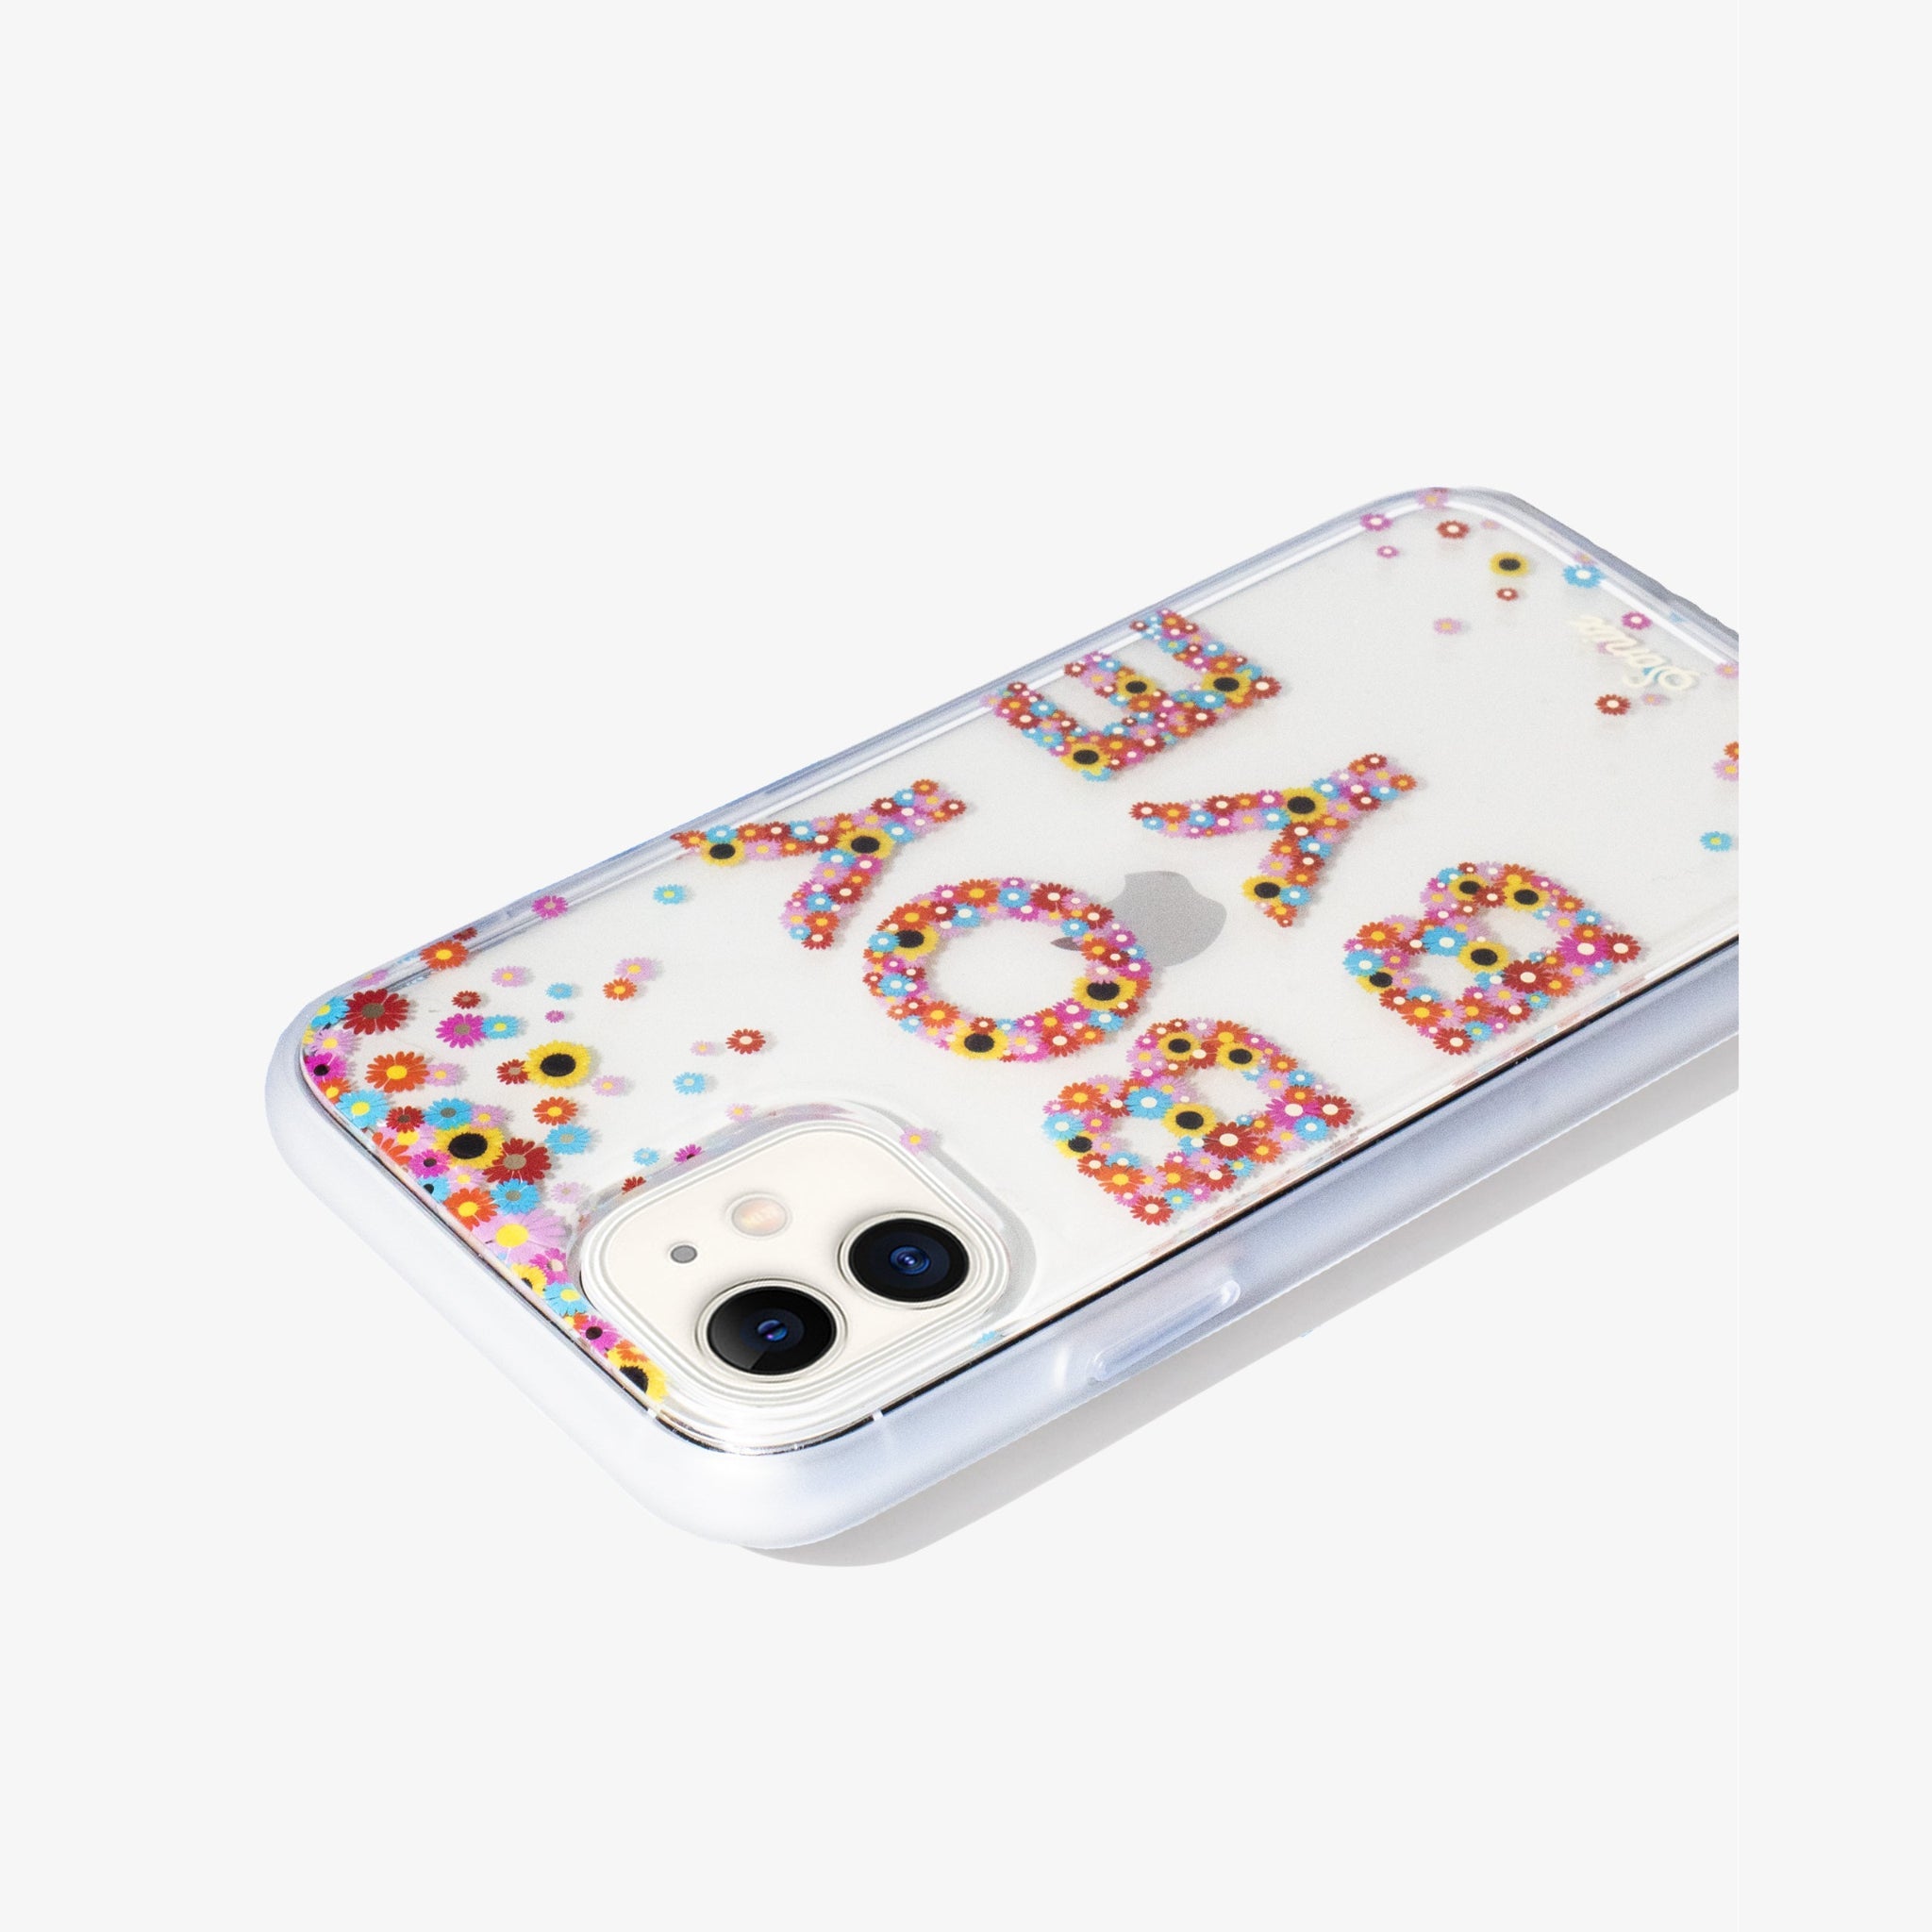 boy bye in floral letters shown on an iphone 11 pro side view